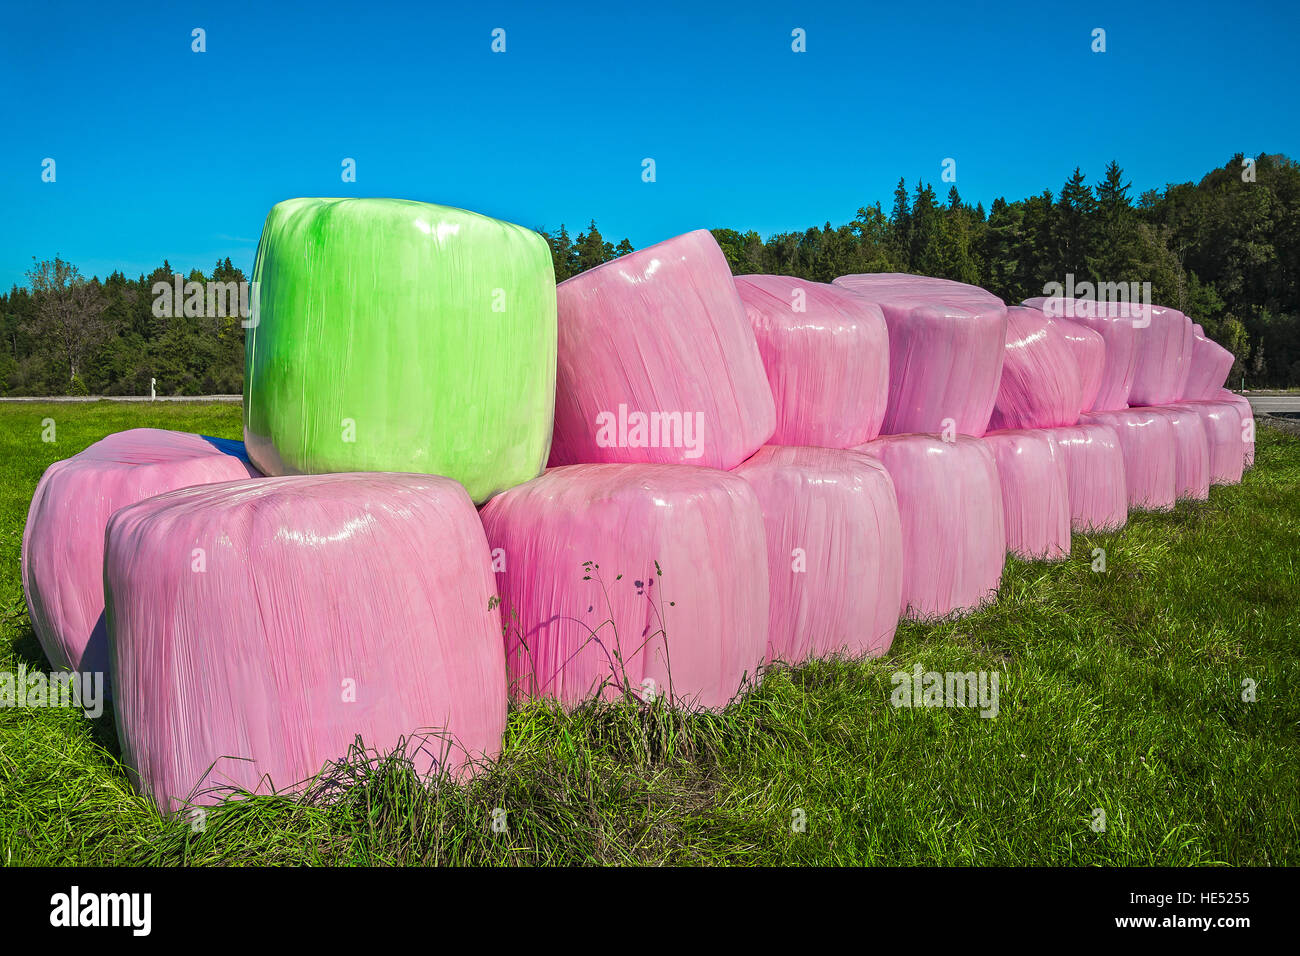 Silage bales in pink and green plastic wrap, Bavaria, Germany Stock Photo